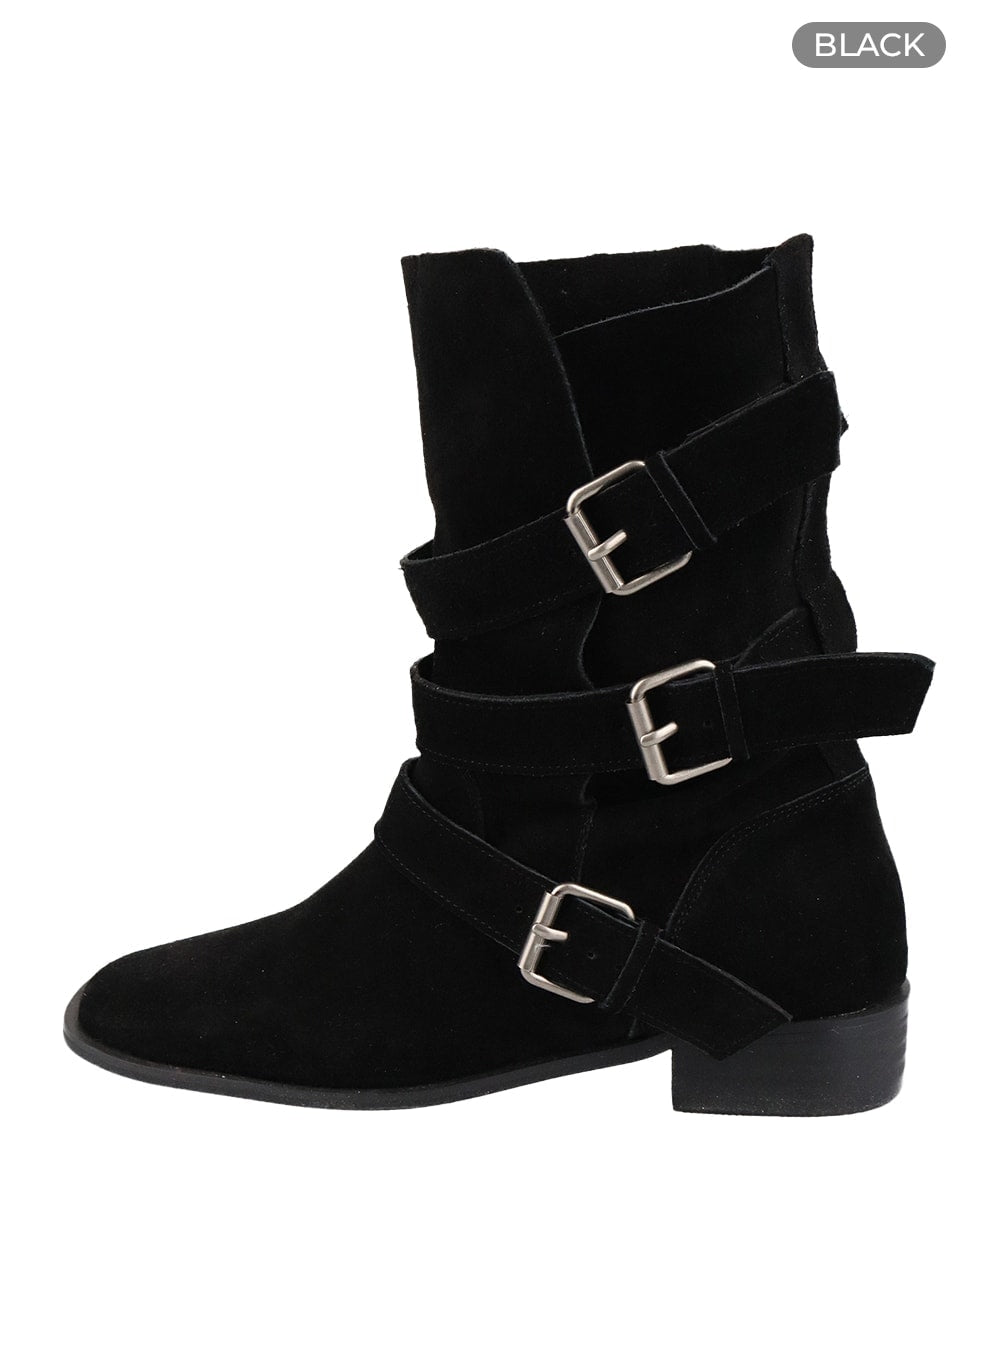 suede-buckle-ankle-boots-cm421 / Black